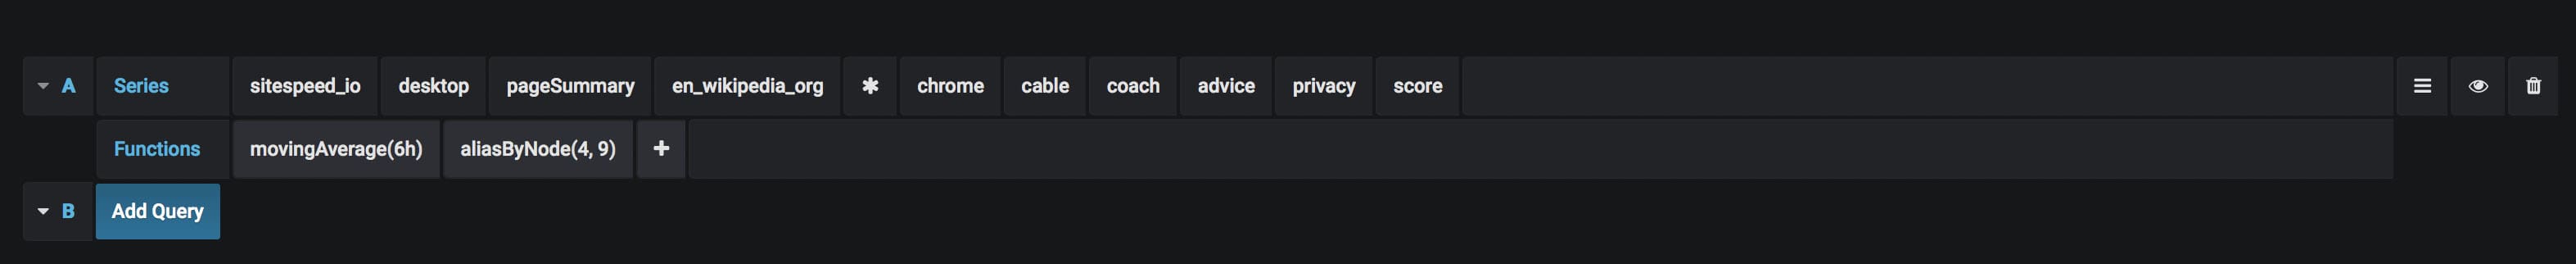 Alert privacy query